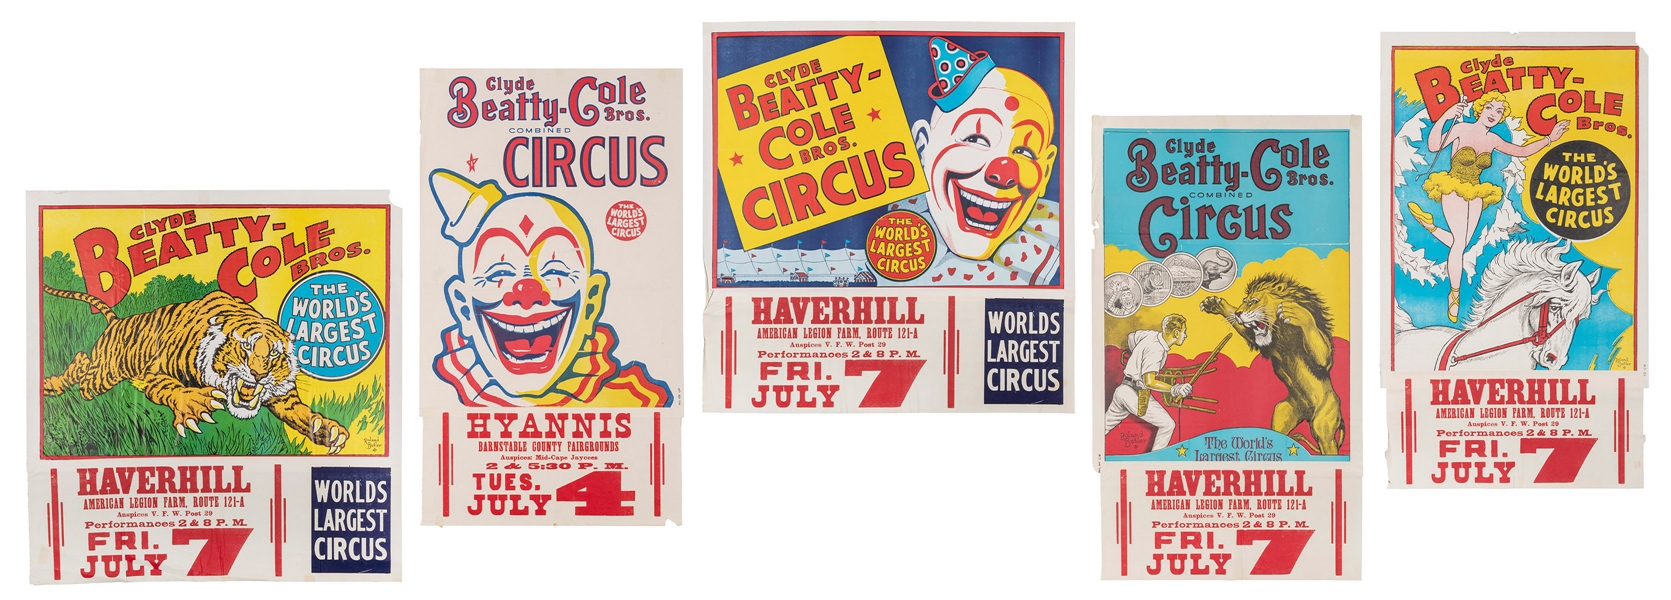  Five Clyde Beatty-Cole Brothers Circus Posters. Circa 1960s...